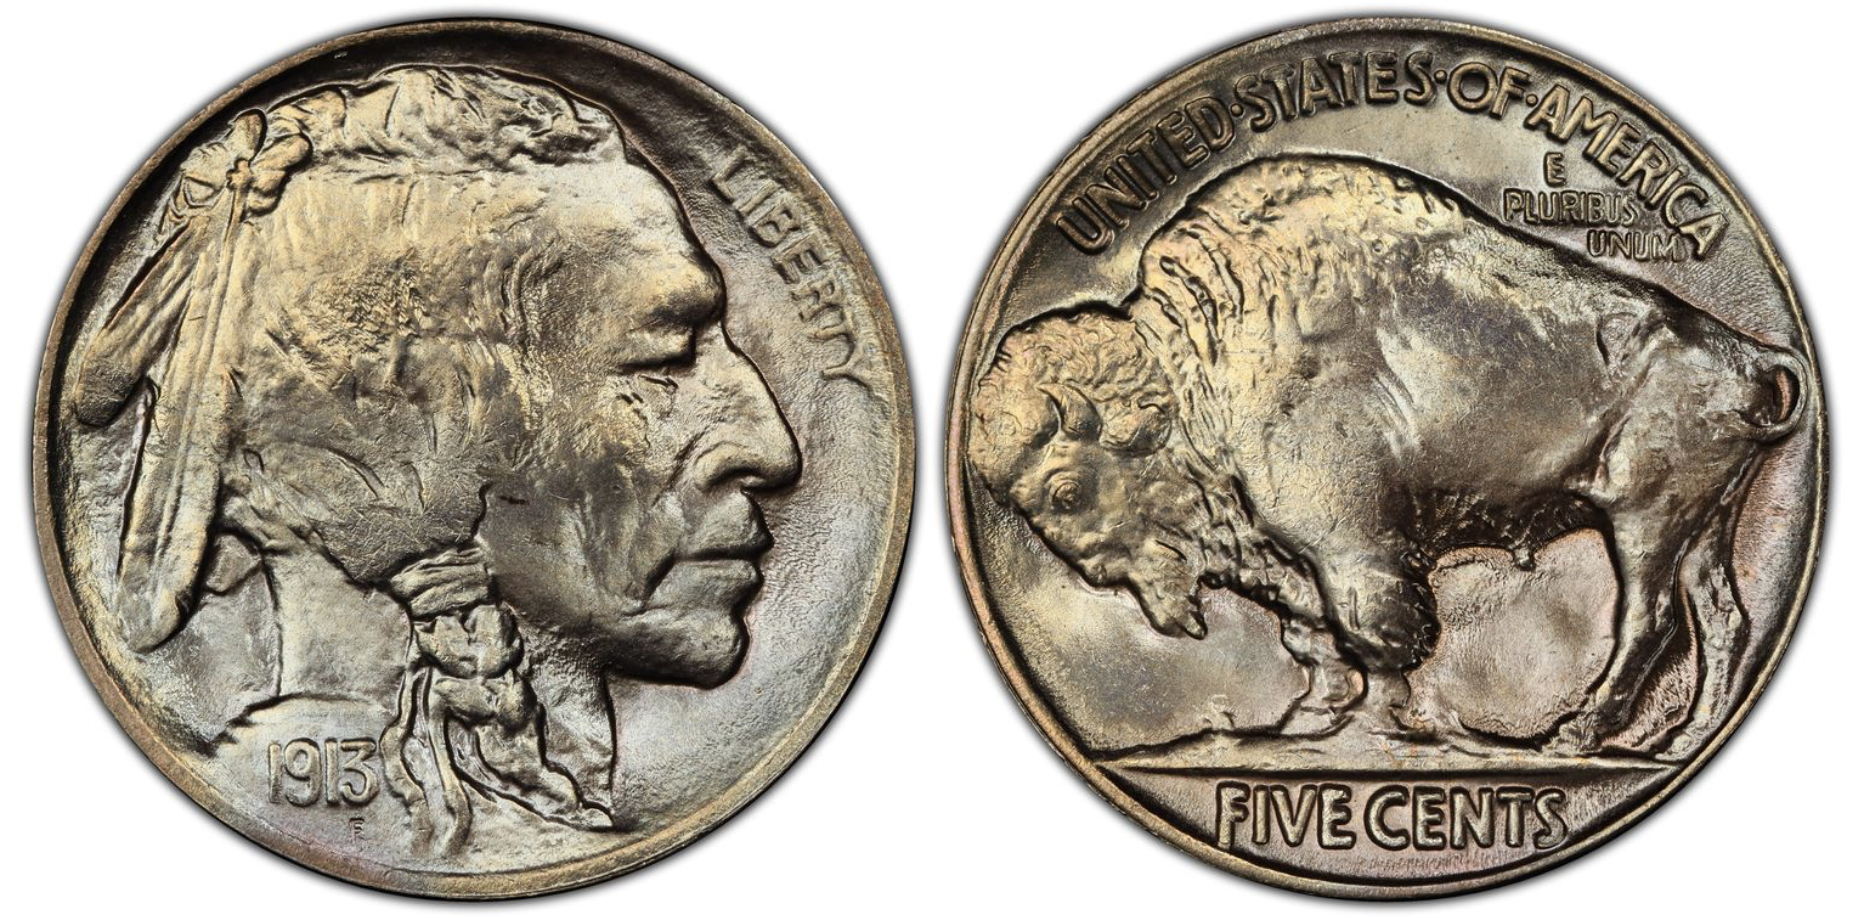 A guide to nickel coins